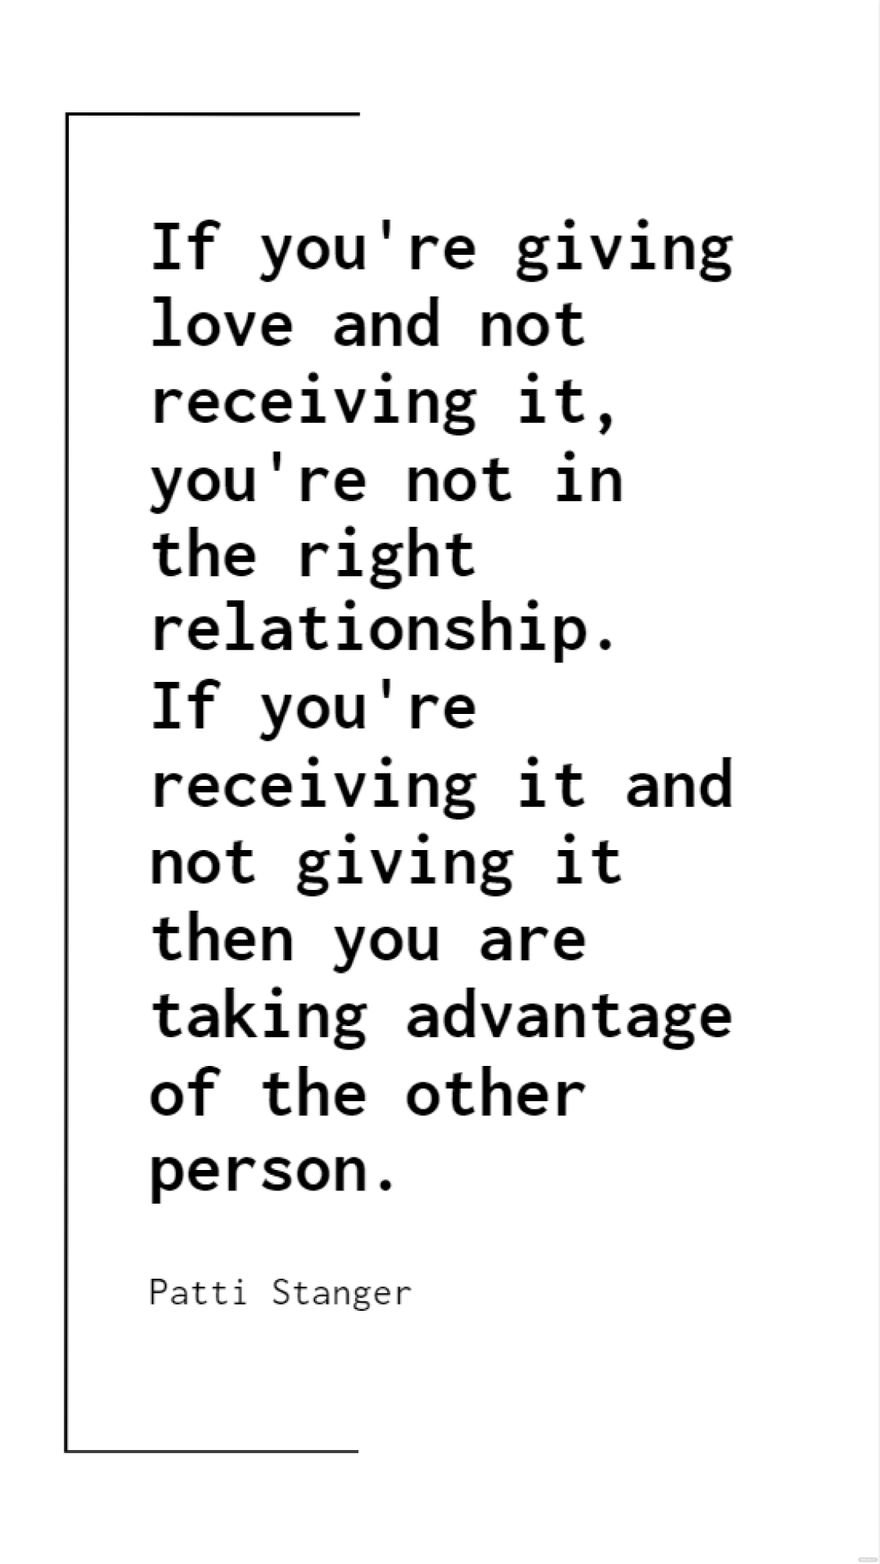 Patti Stanger - If you're giving love and not receiving it, you're not in the right relationship. If you're receiving it and not giving it then you are taking advantage of the other person.